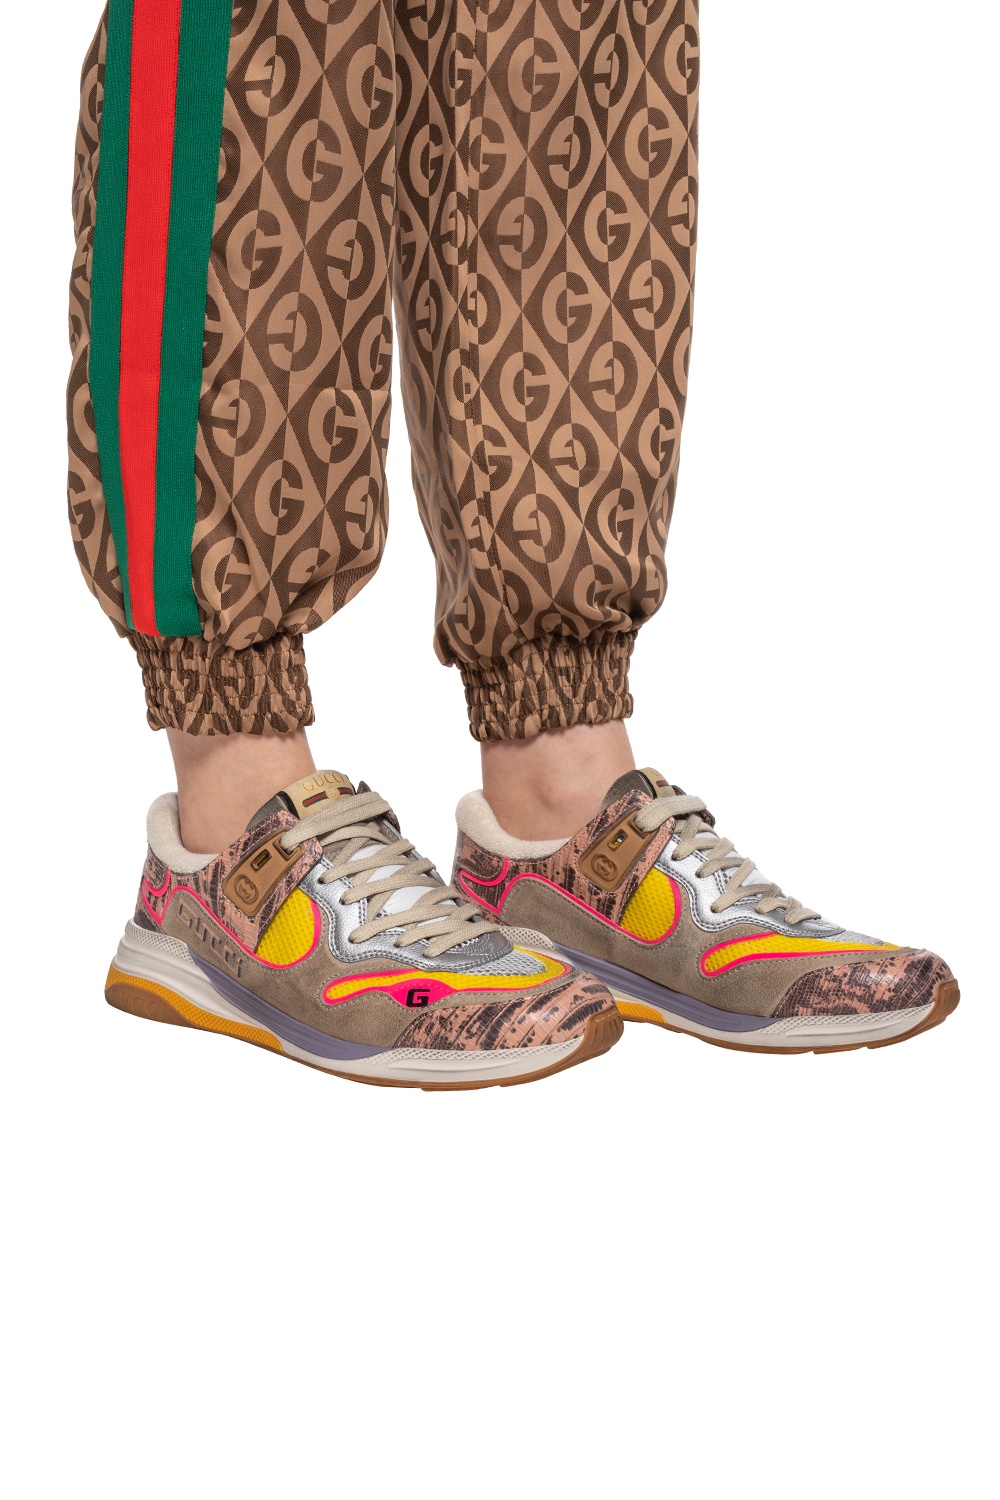 Gucci 'Ultrapace' sneakers